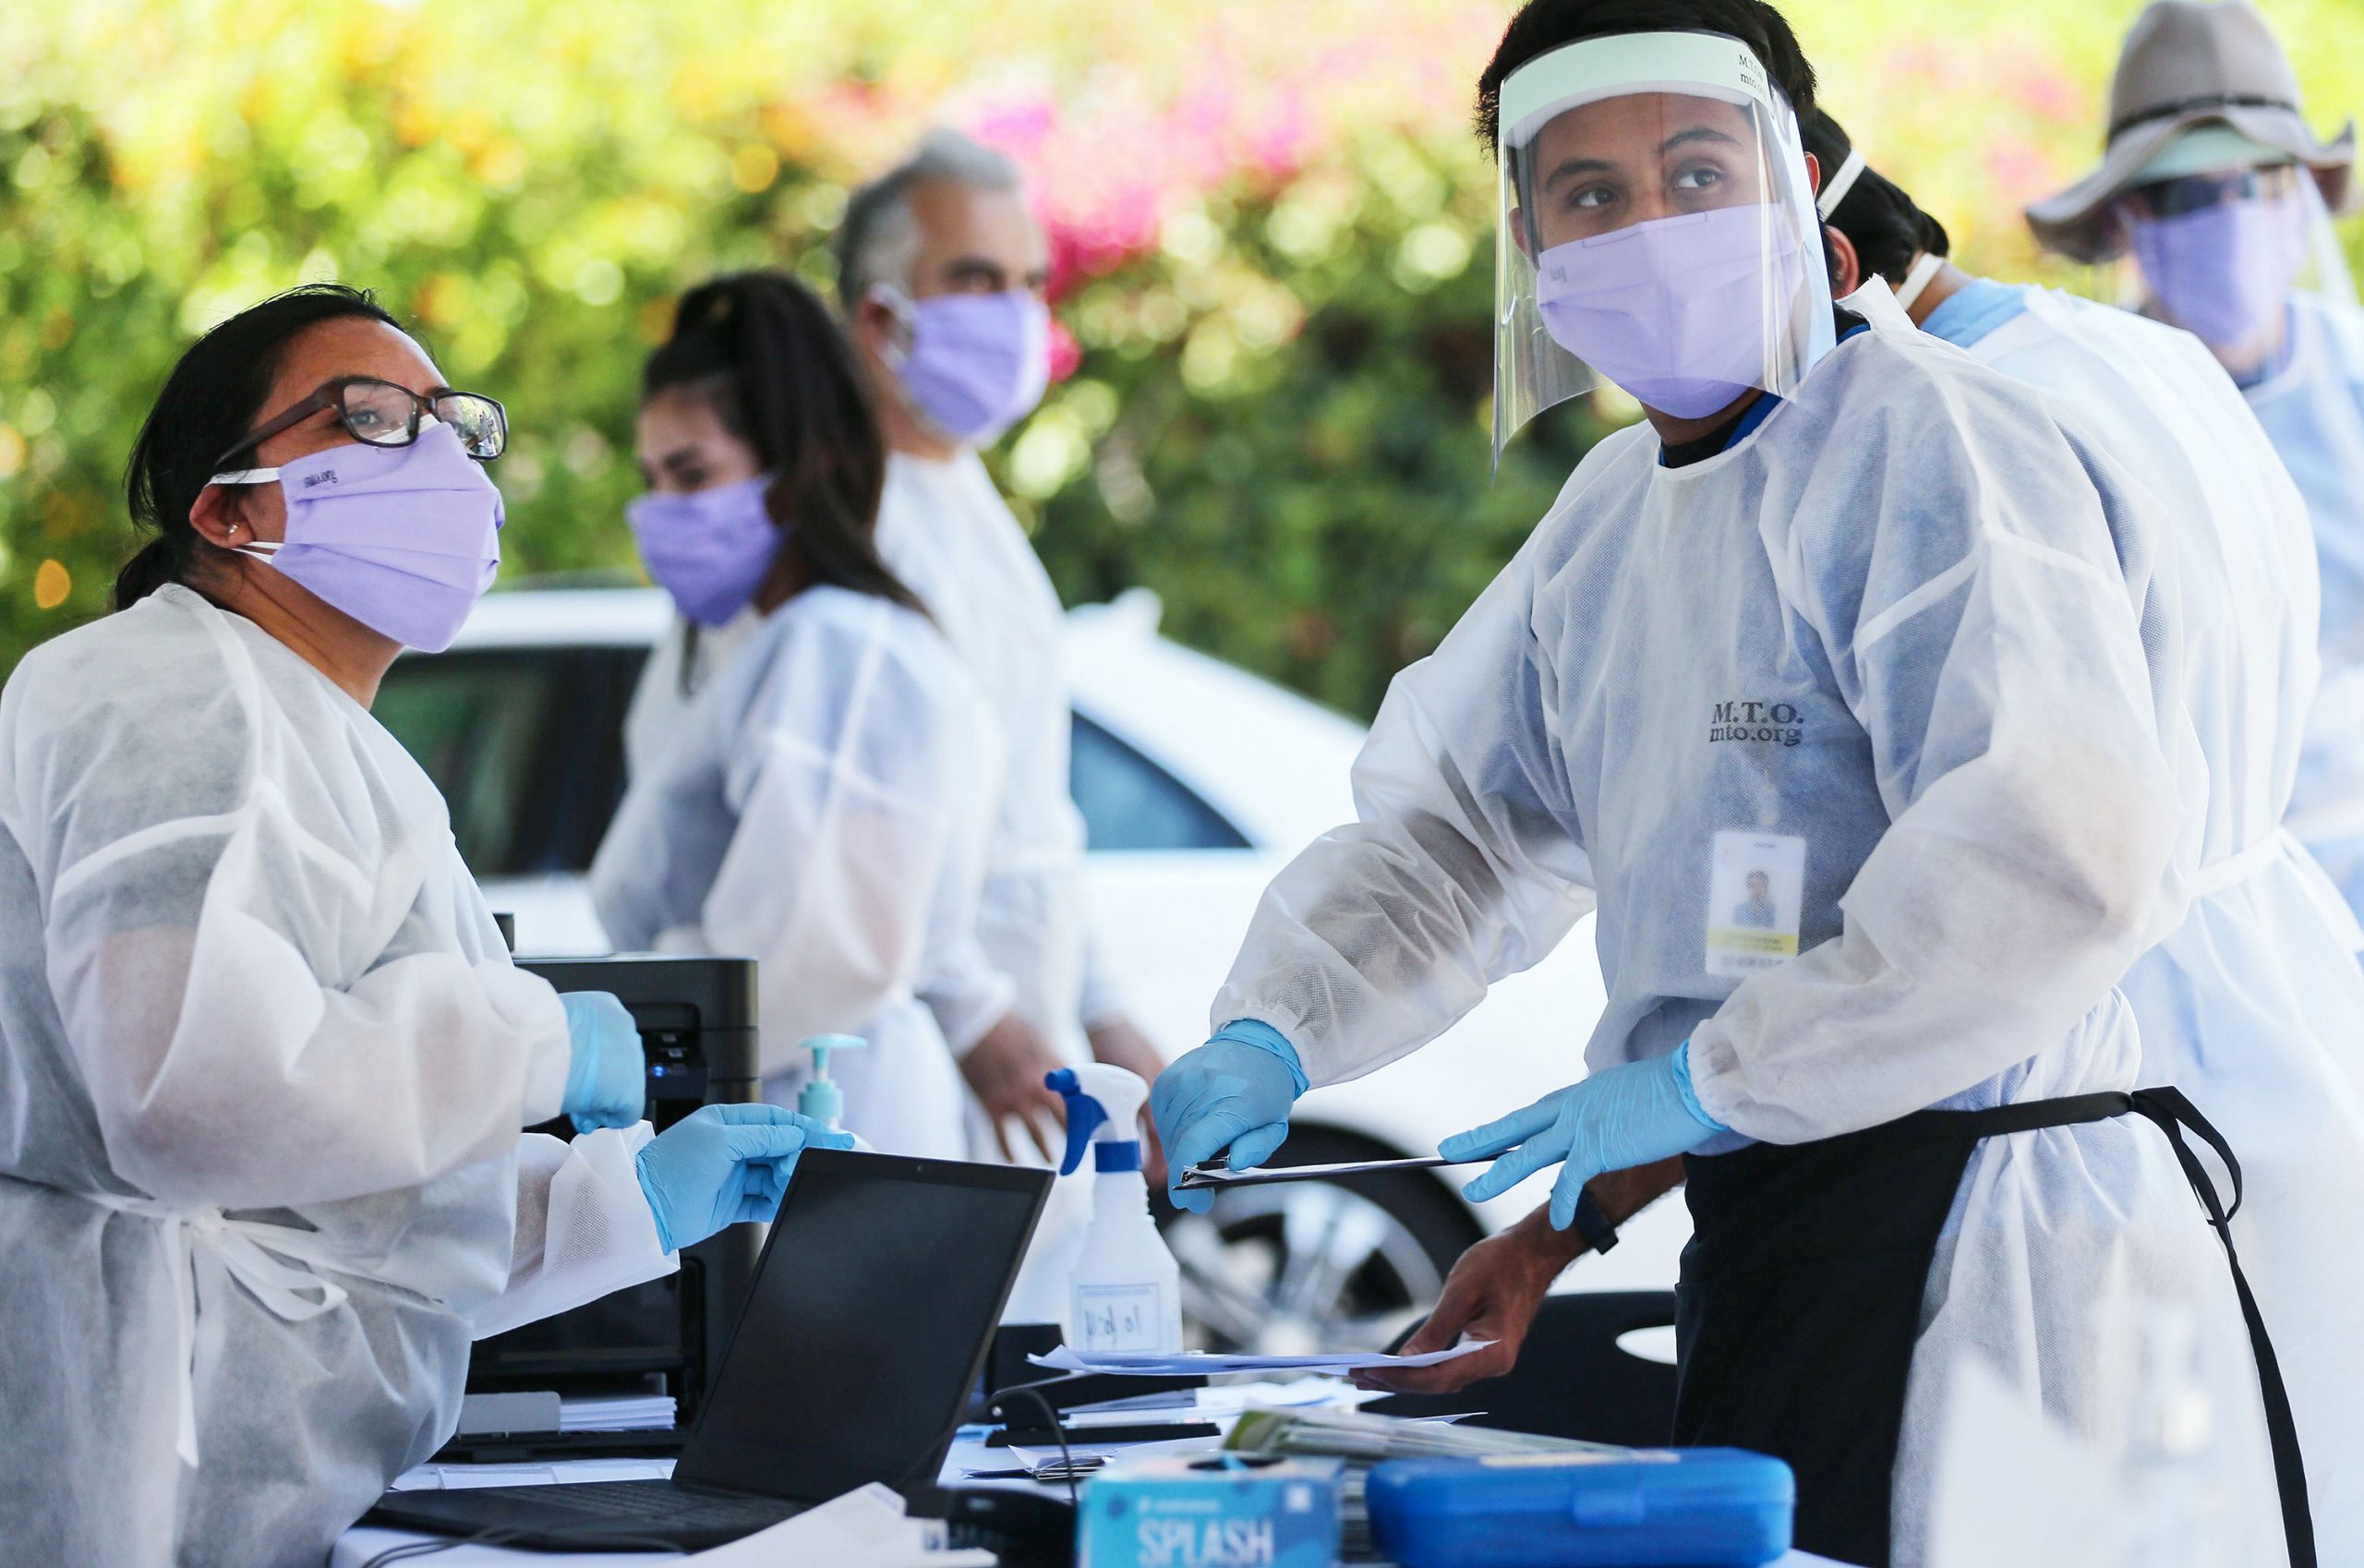 Healthcare workers facilitate Covid-19 tests on August 11 in Los Angeles, California.